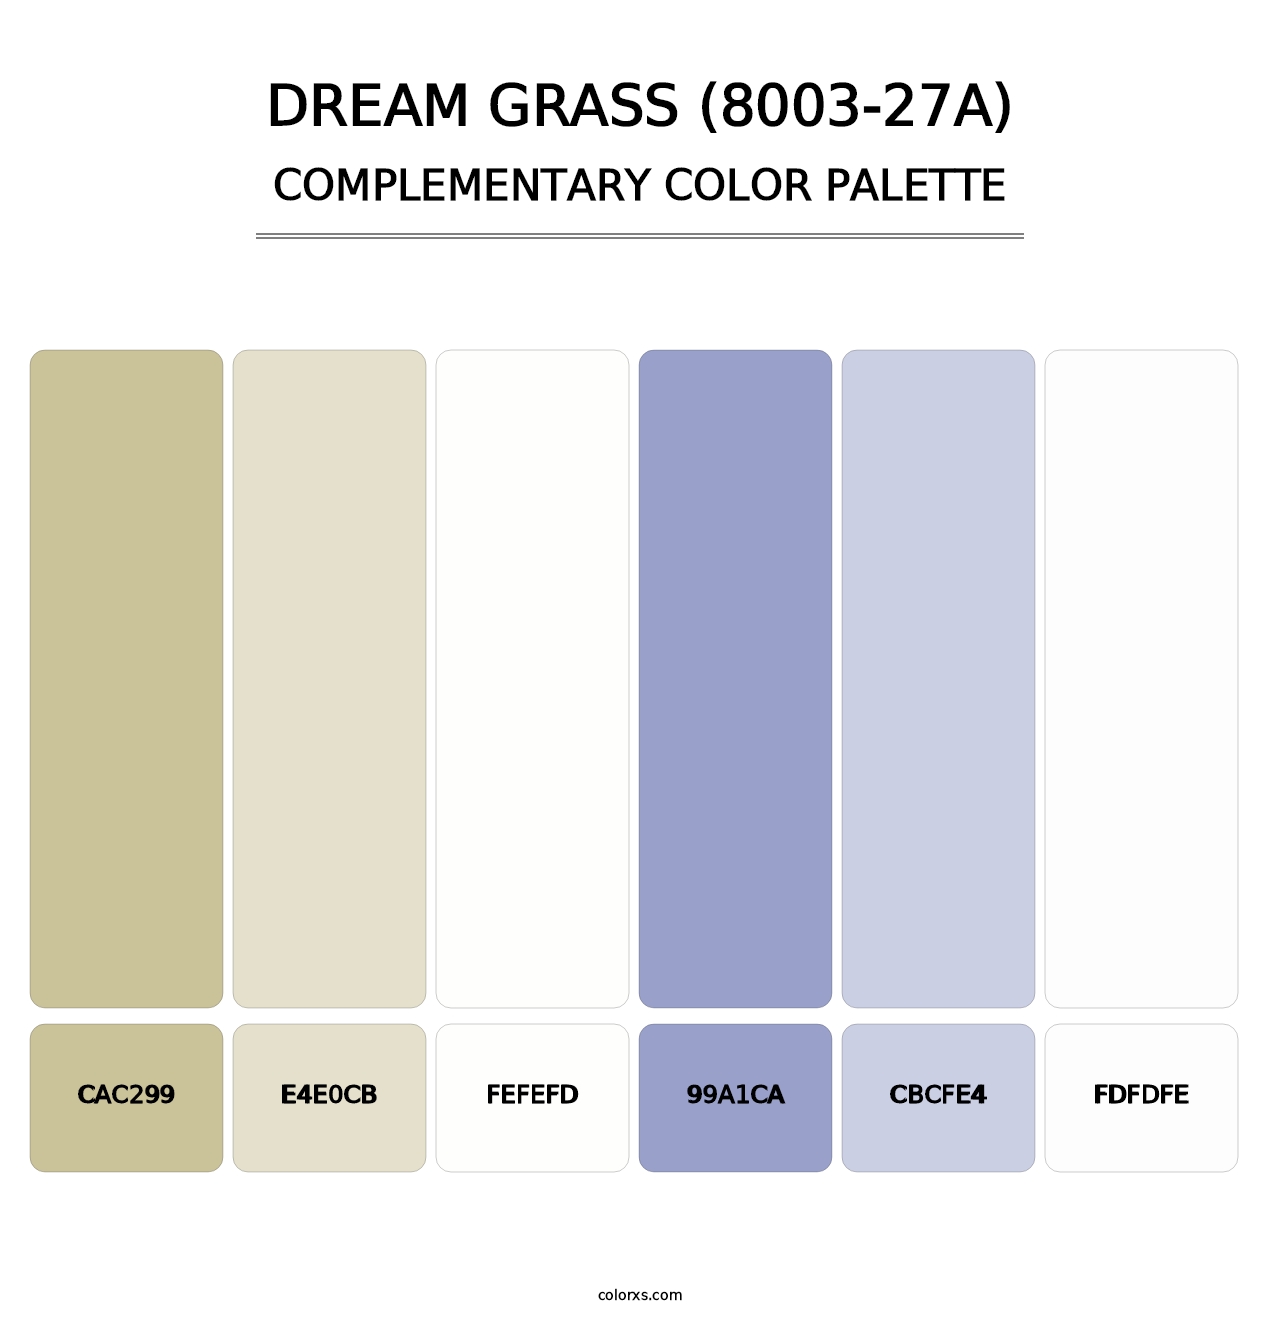 Dream Grass (8003-27A) - Complementary Color Palette